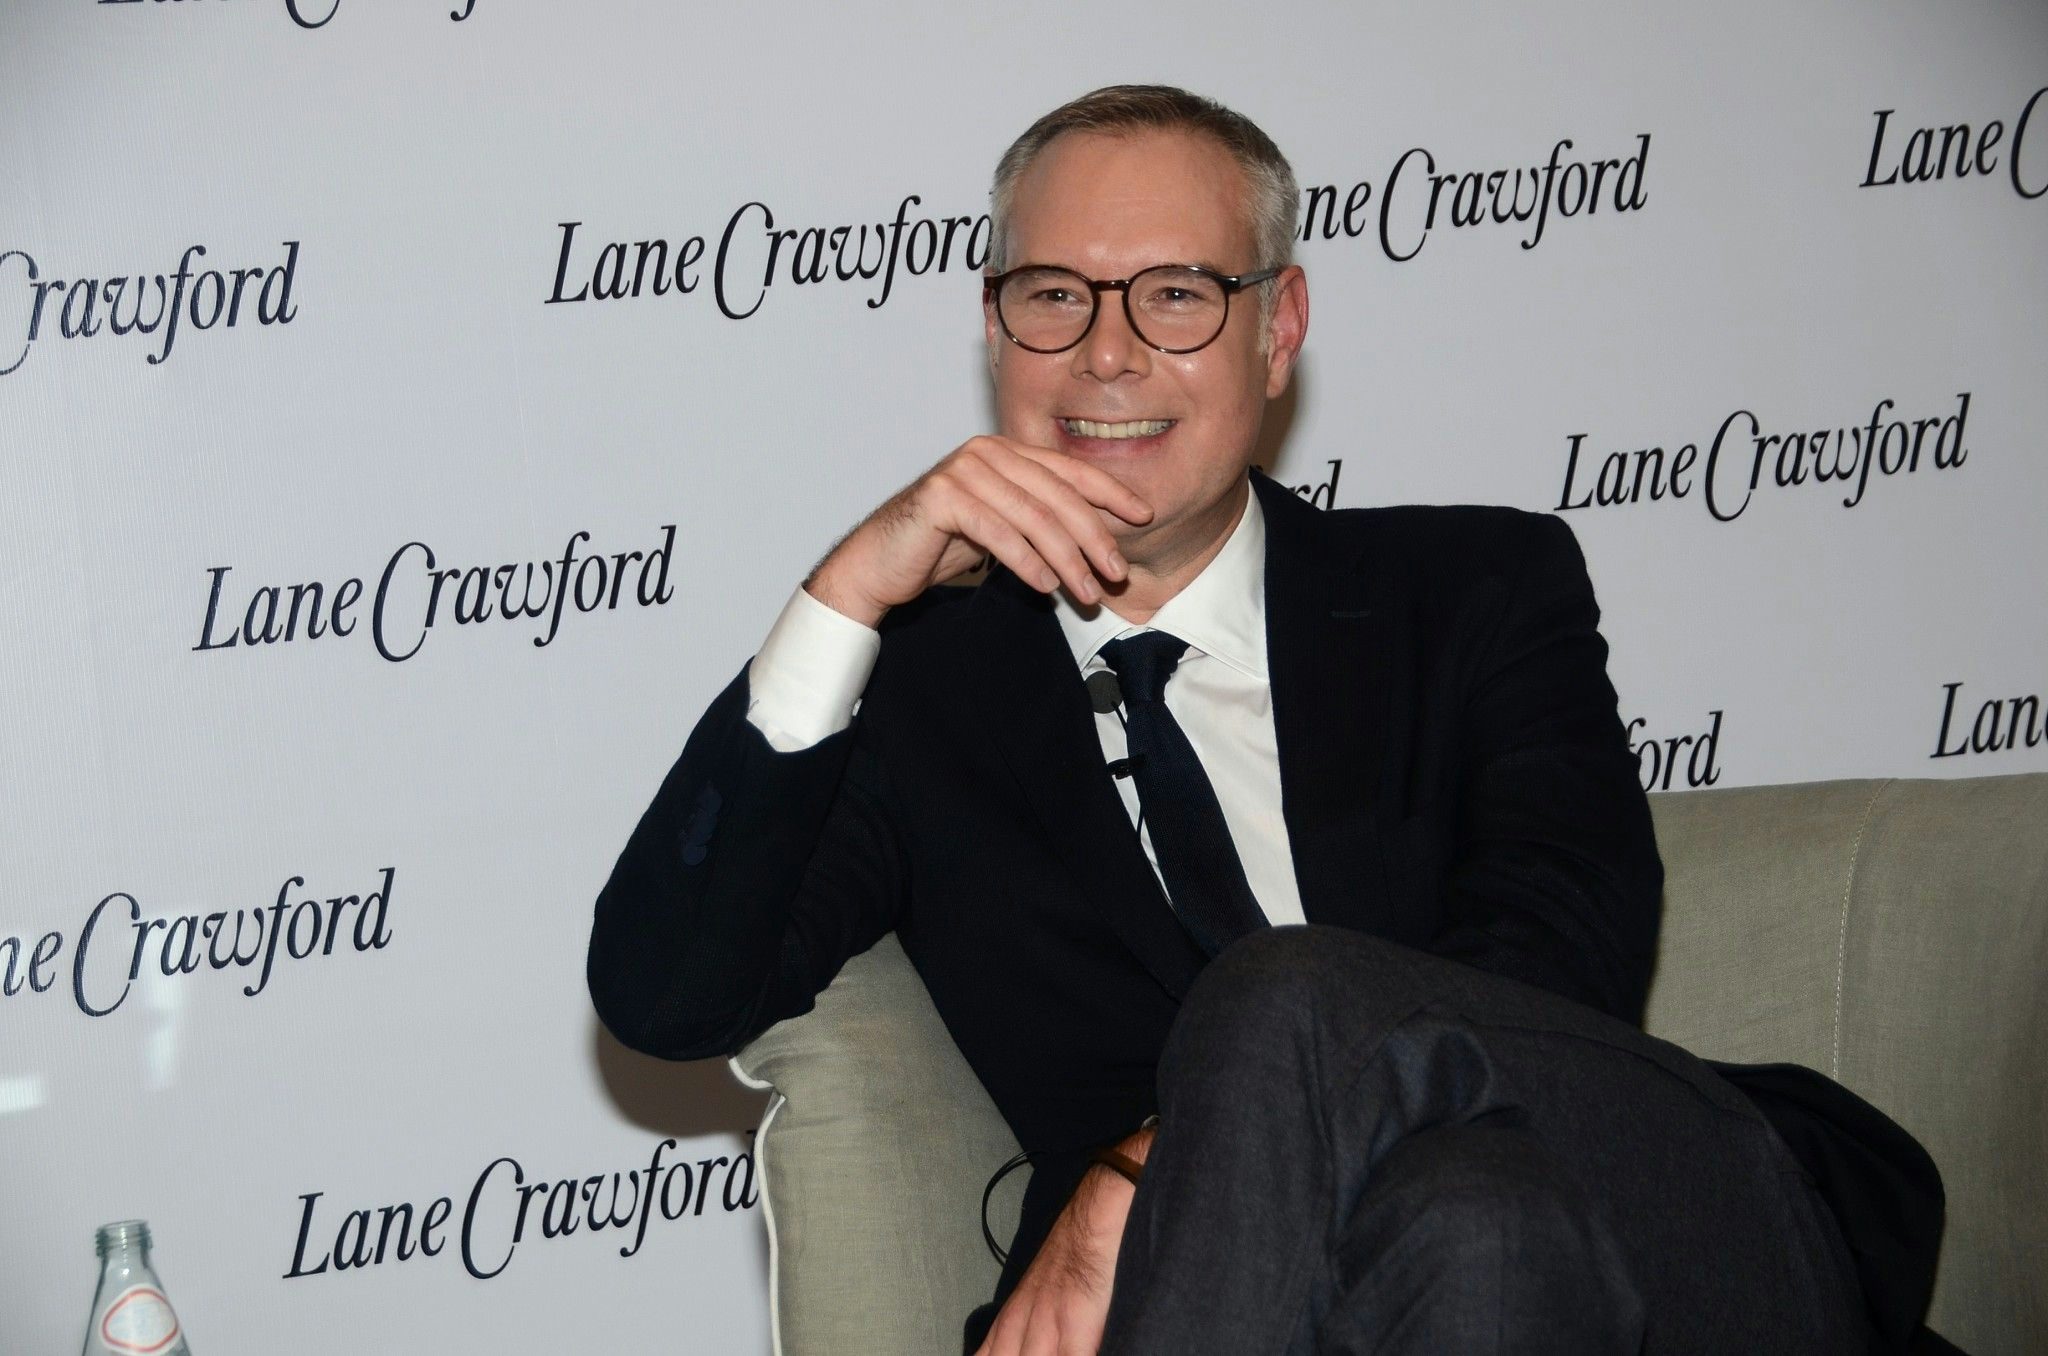 Lane Crawford's Andrew Keith on How to Get Ahead of Evolving Chinese Luxury Shoppers